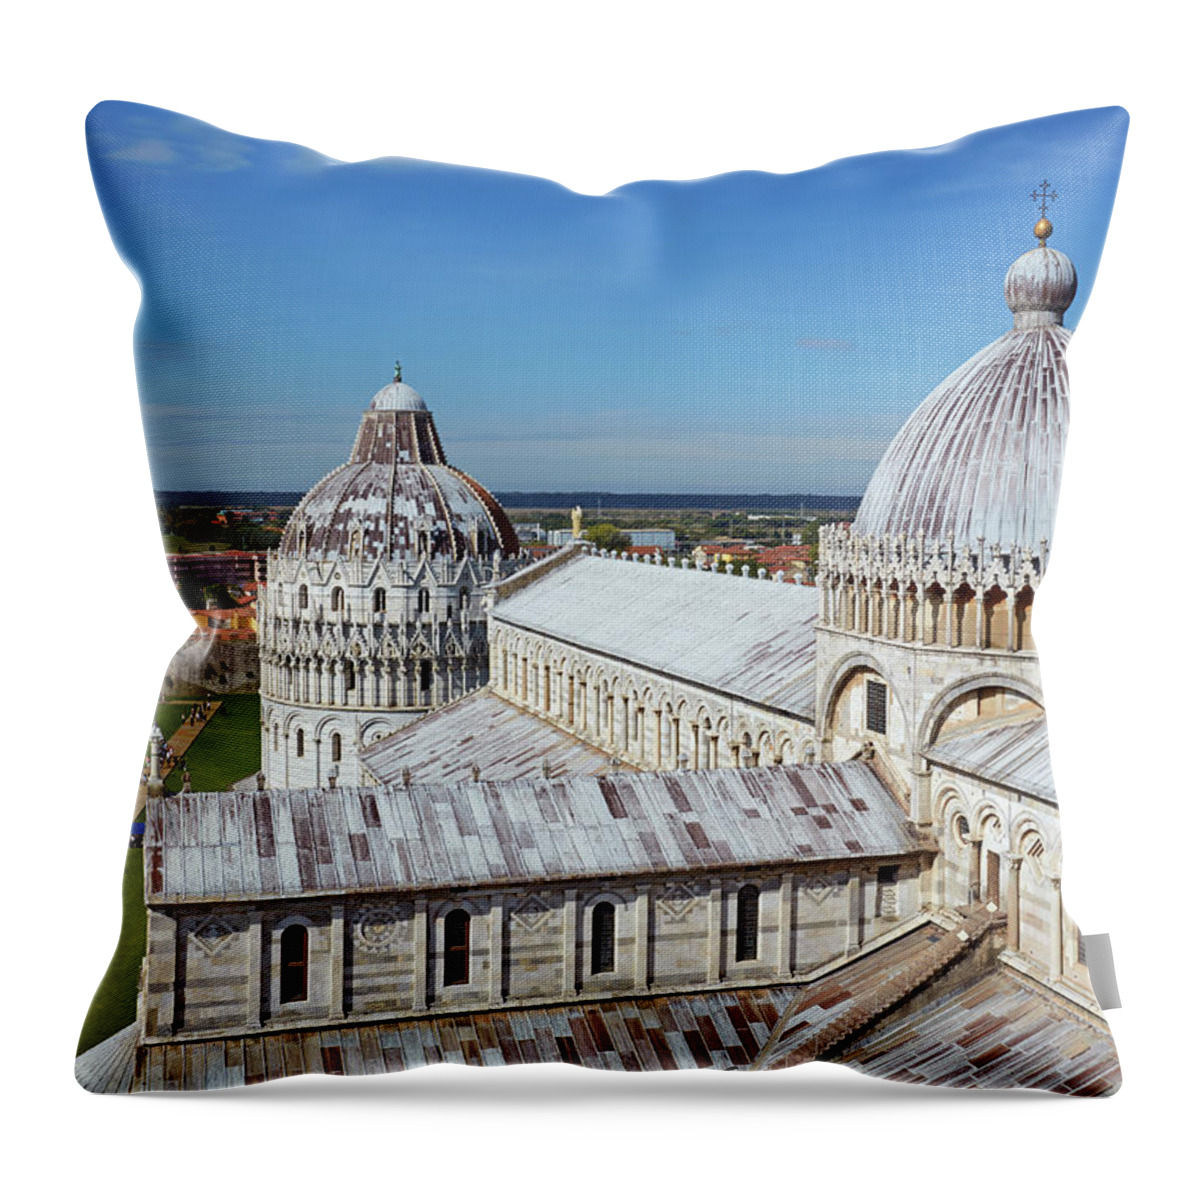 Scenics Throw Pillow featuring the photograph Pisa Duomo And Baptistry At Midday by Allan Baxter